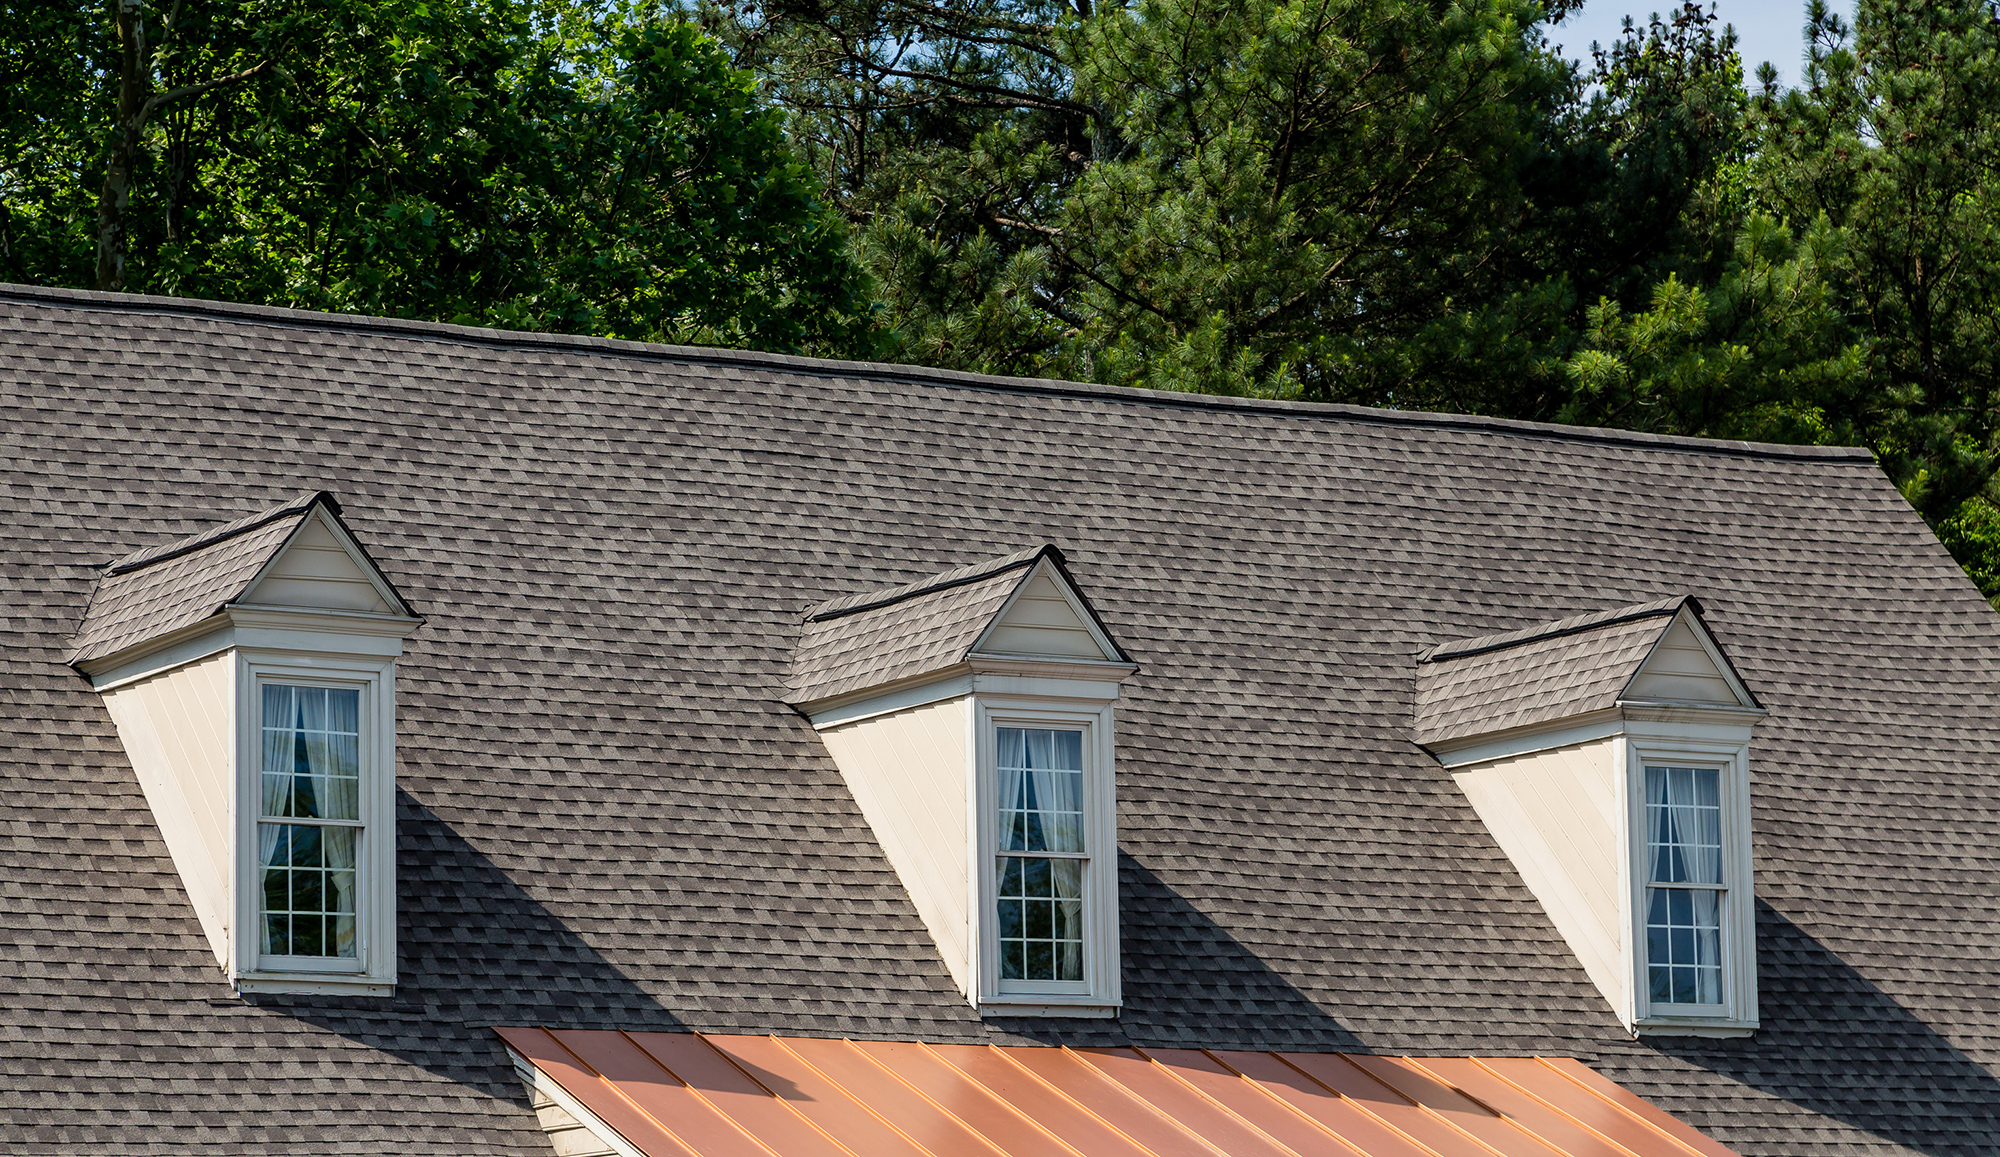 11 Common Questions About Roof Replacement — Answered!